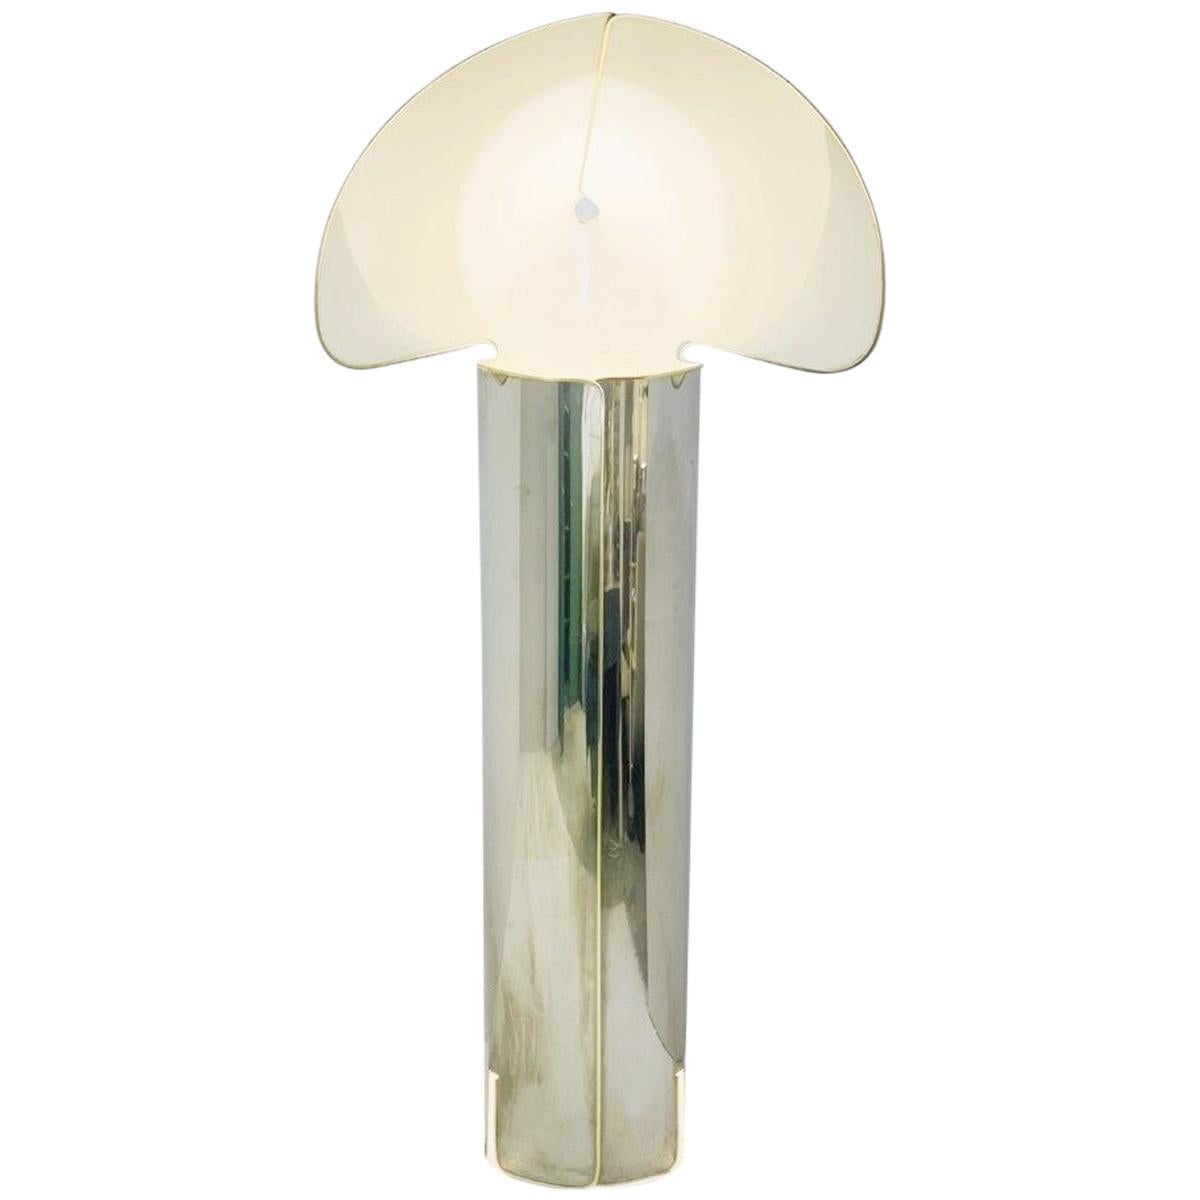 Mid-Century Modern Floor Lamp 'Chiara' by Mario Bellini for Floss, First Edition